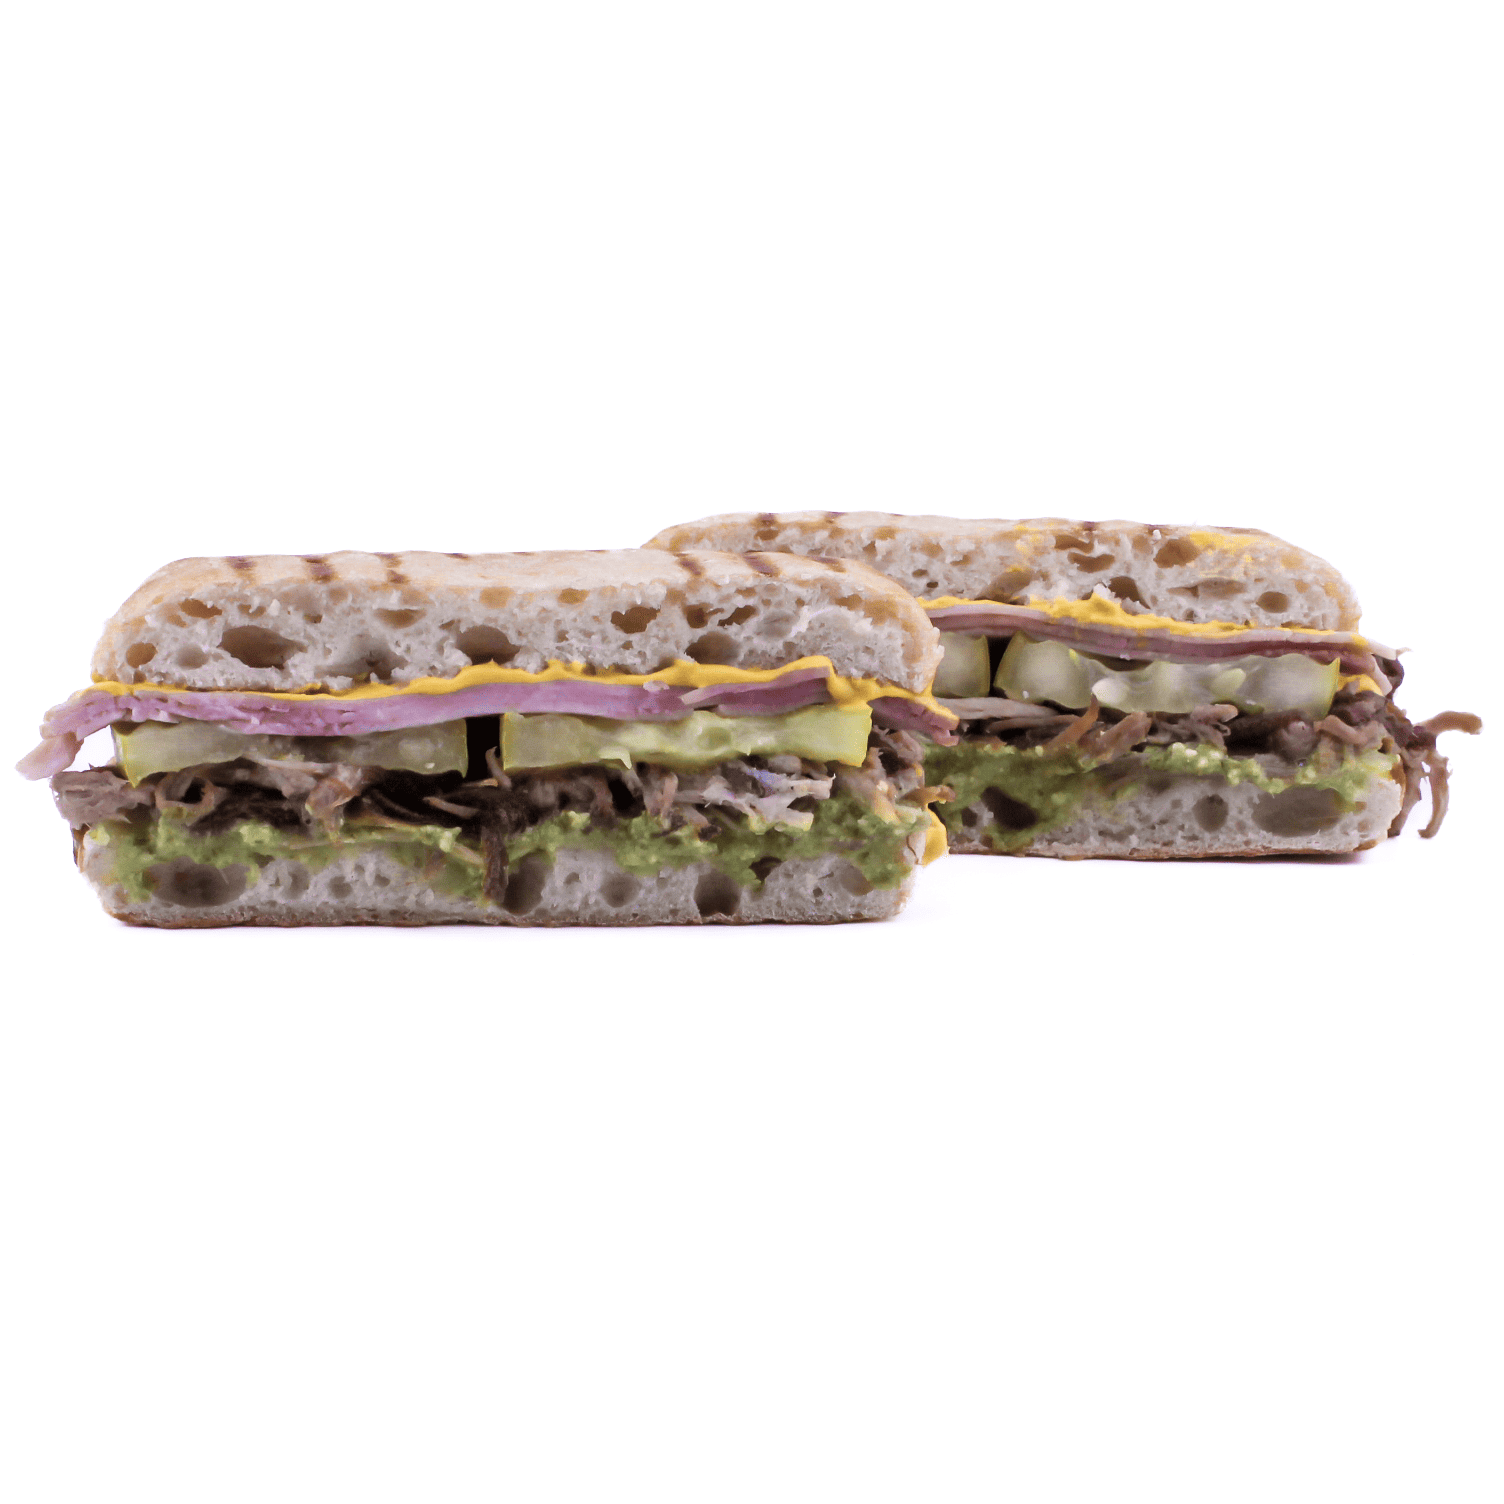 Cubano - Slow roasted pork and onions, ham, yellow mustard, Swiss cheese, pickles, green goodness dressing on pressed ciabatta